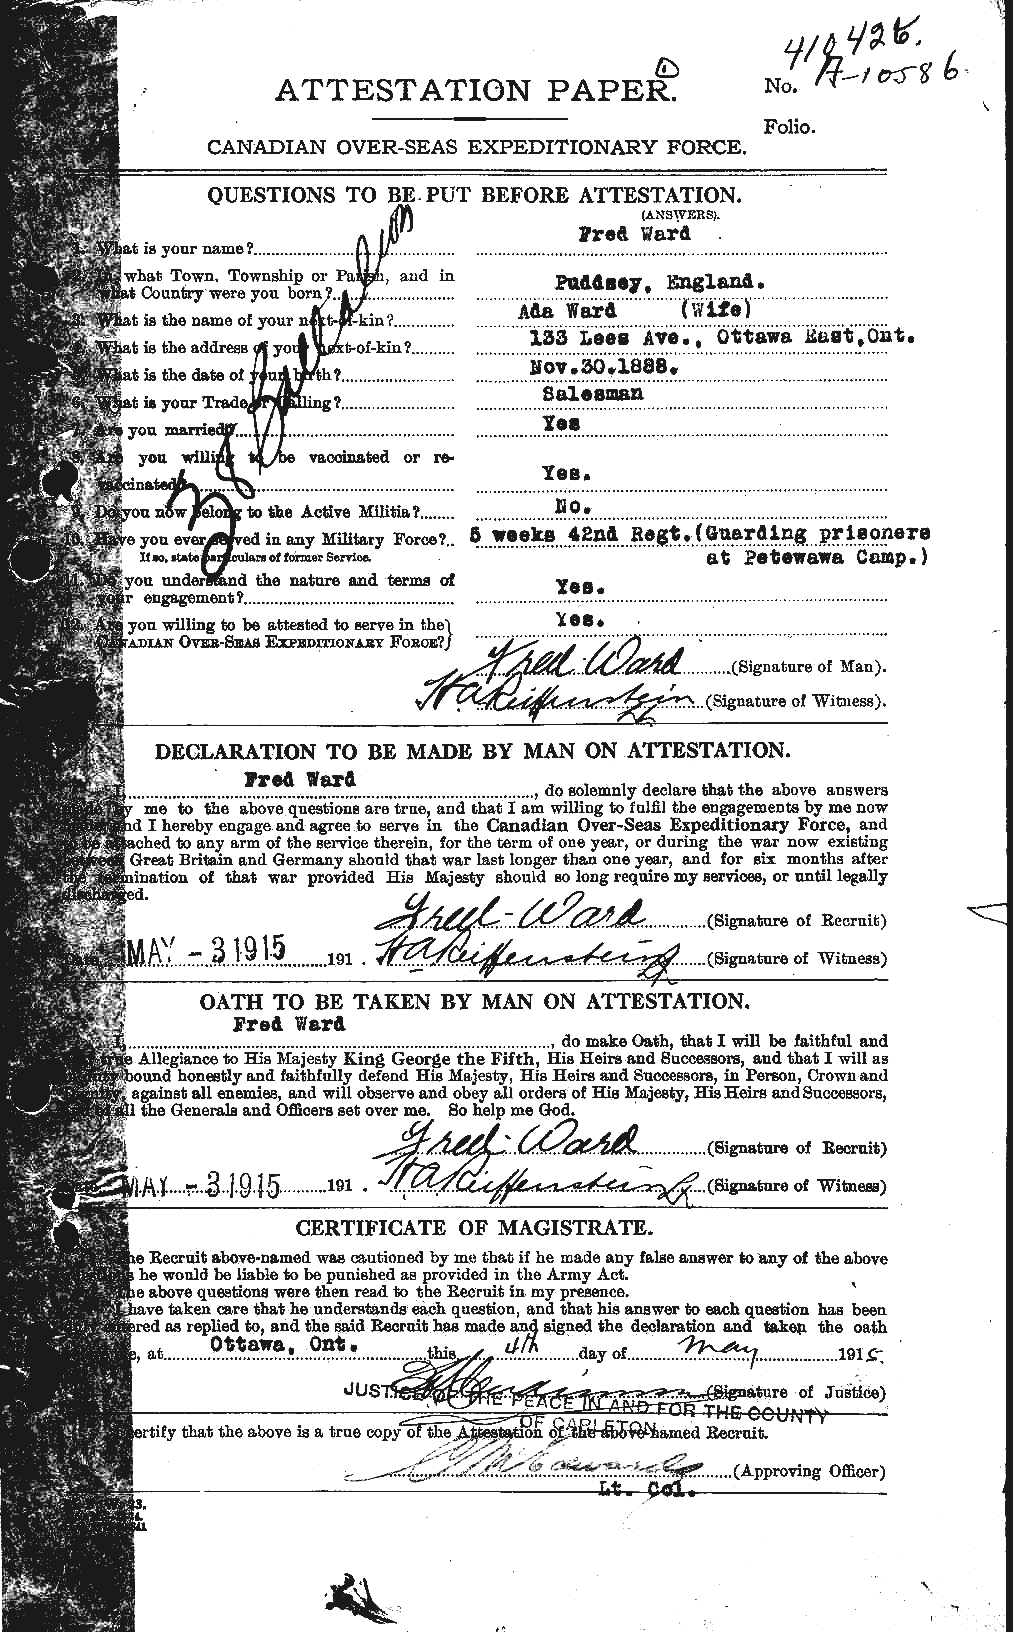 Personnel Records of the First World War - CEF 657704a